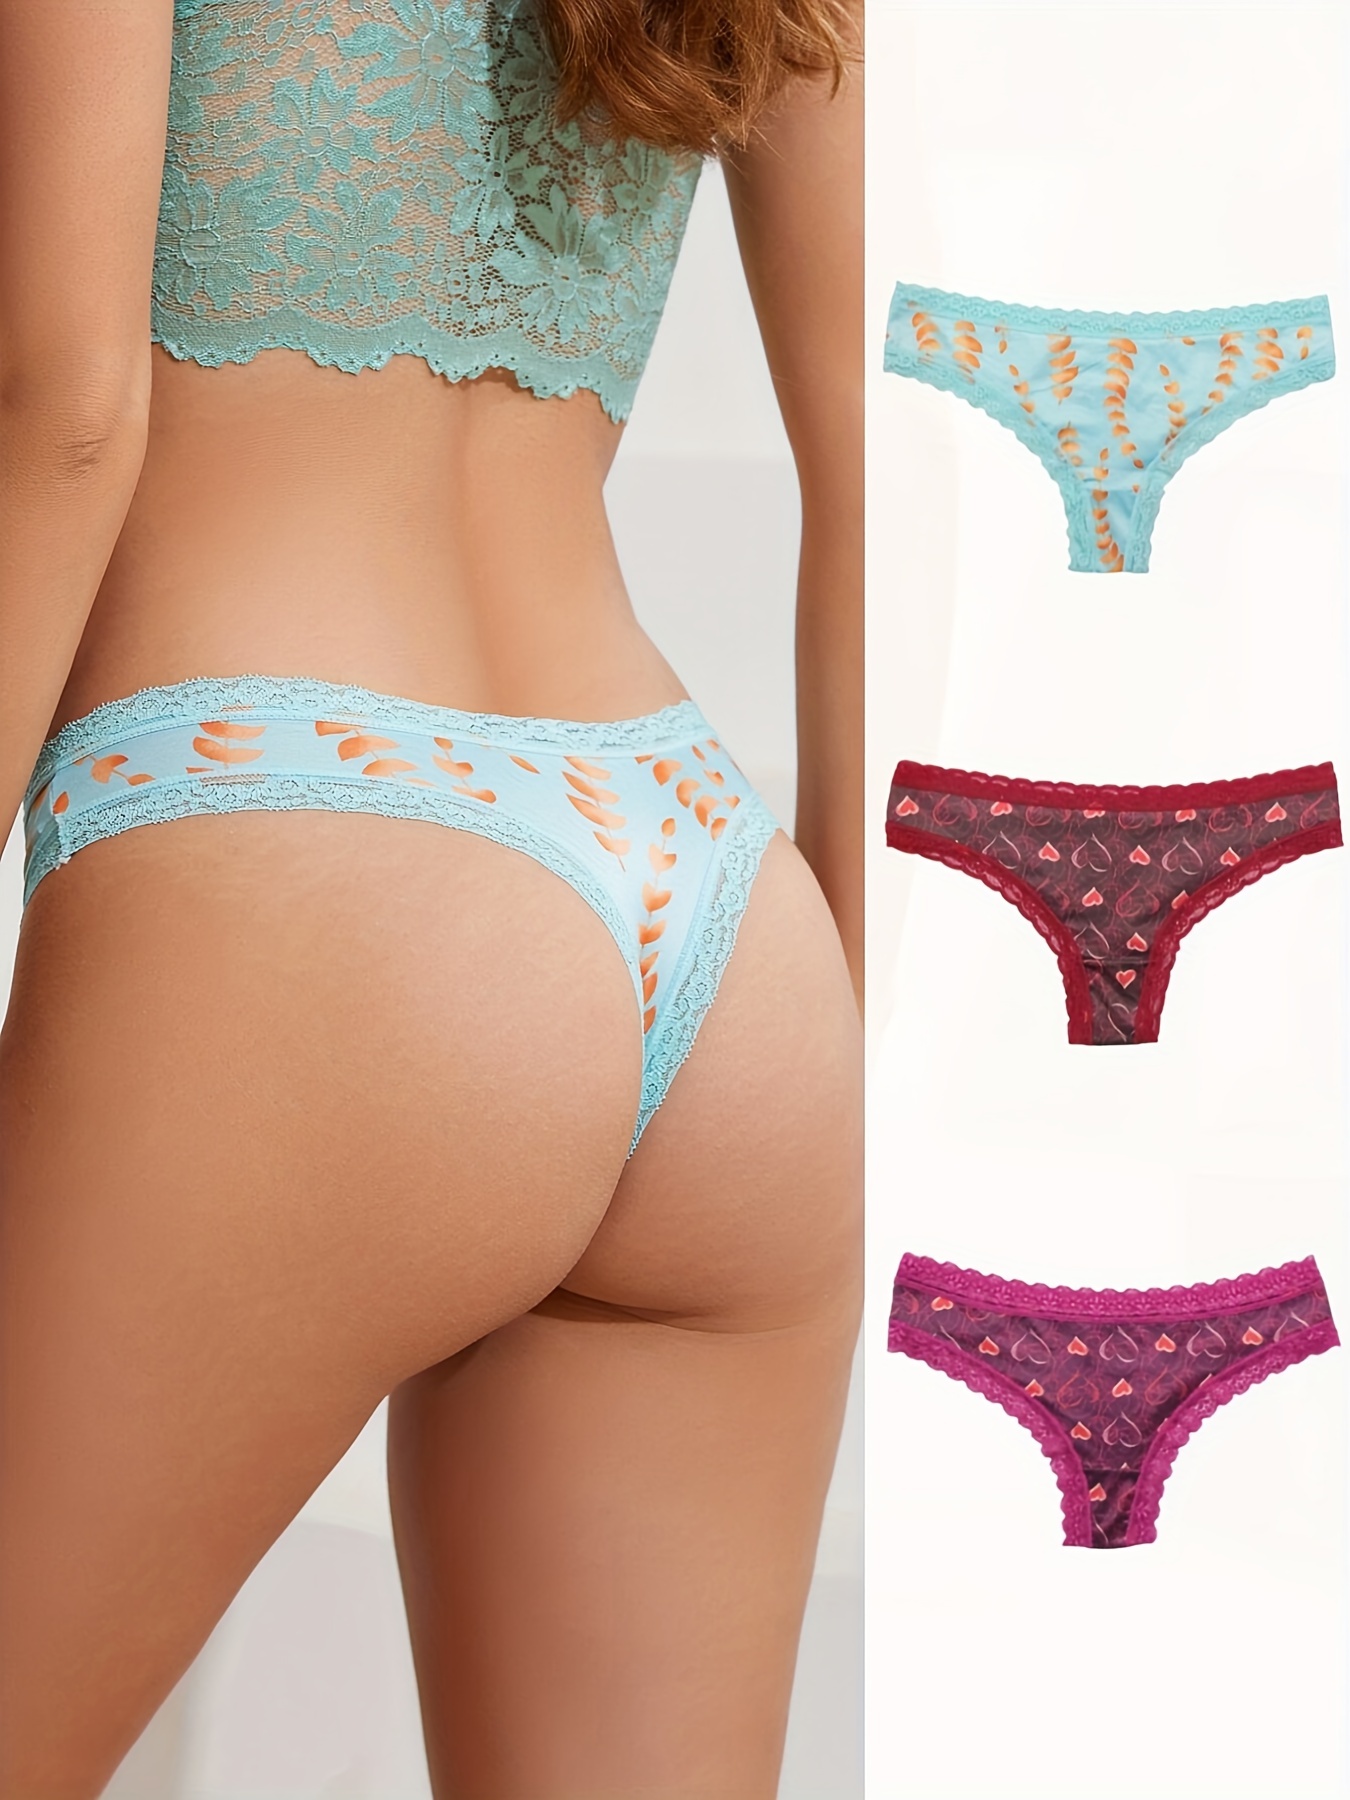 4Pcs Rhinestone Contrast Lace Thongs, Soft & Comfy Stretchy Intimates  Panties, Women's Lingerie & Underwear